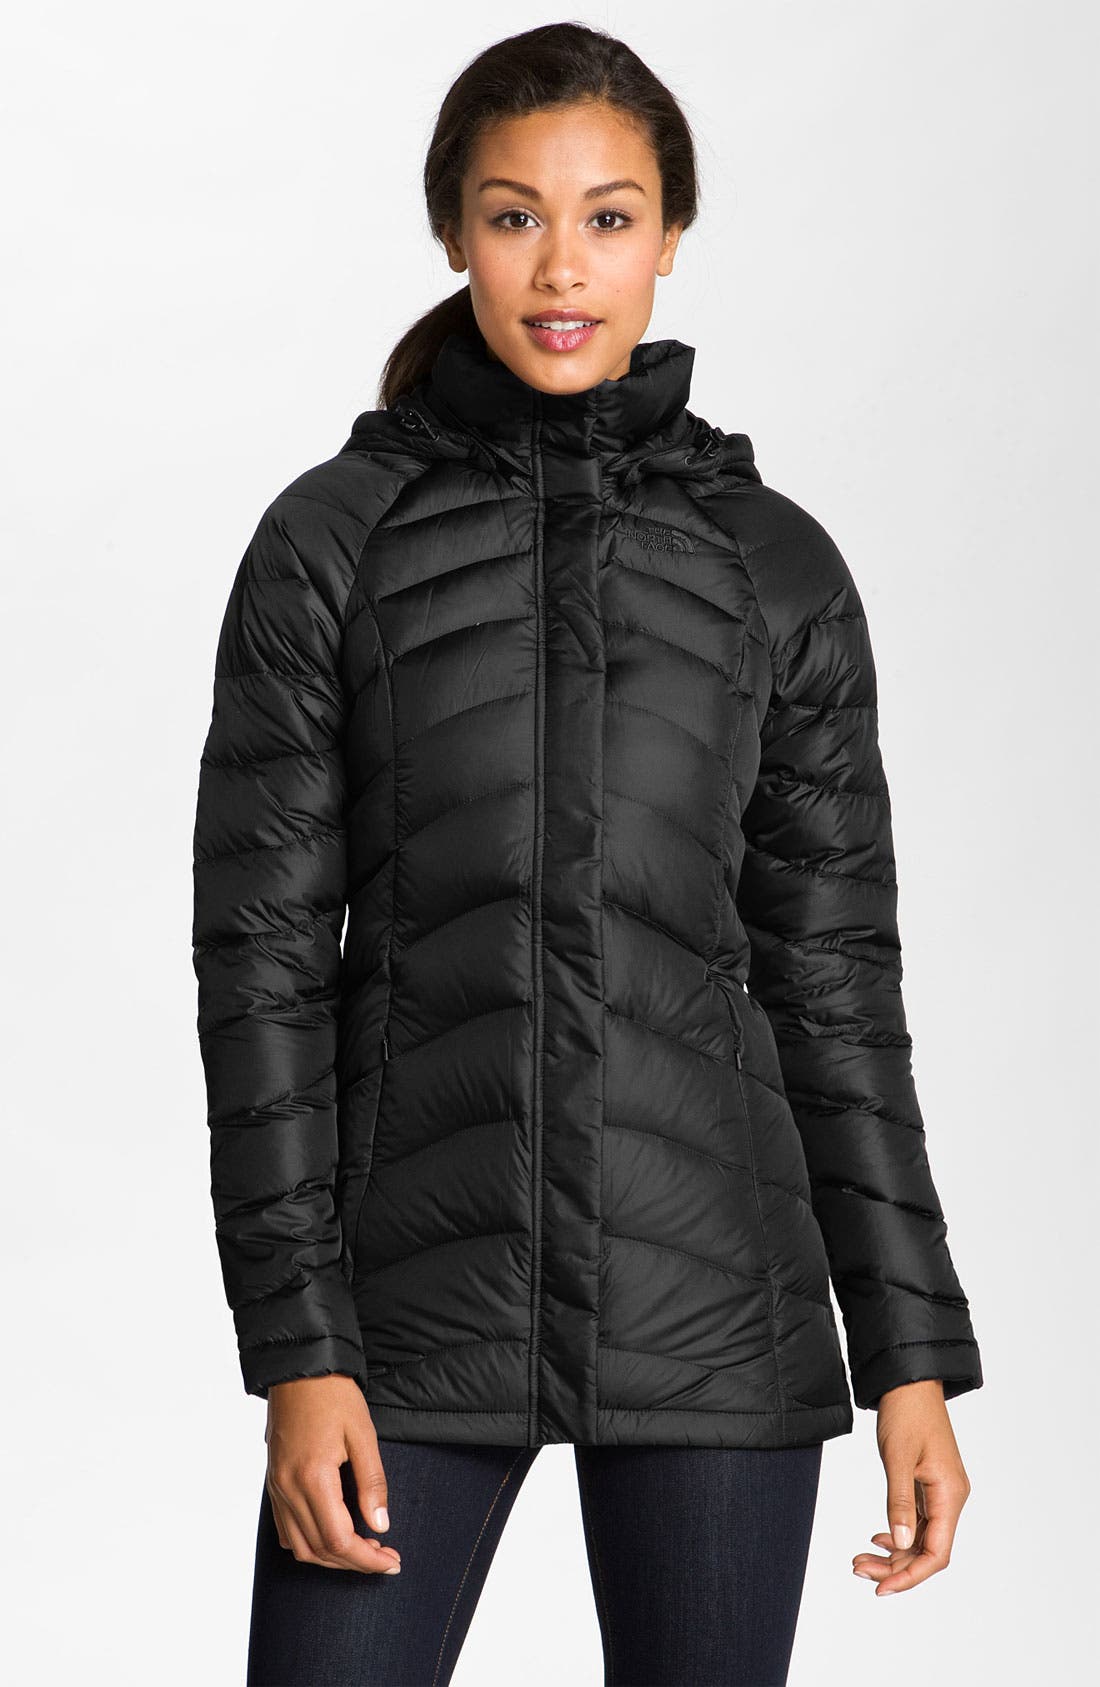 The North Face 'Transit' Down Jacket 